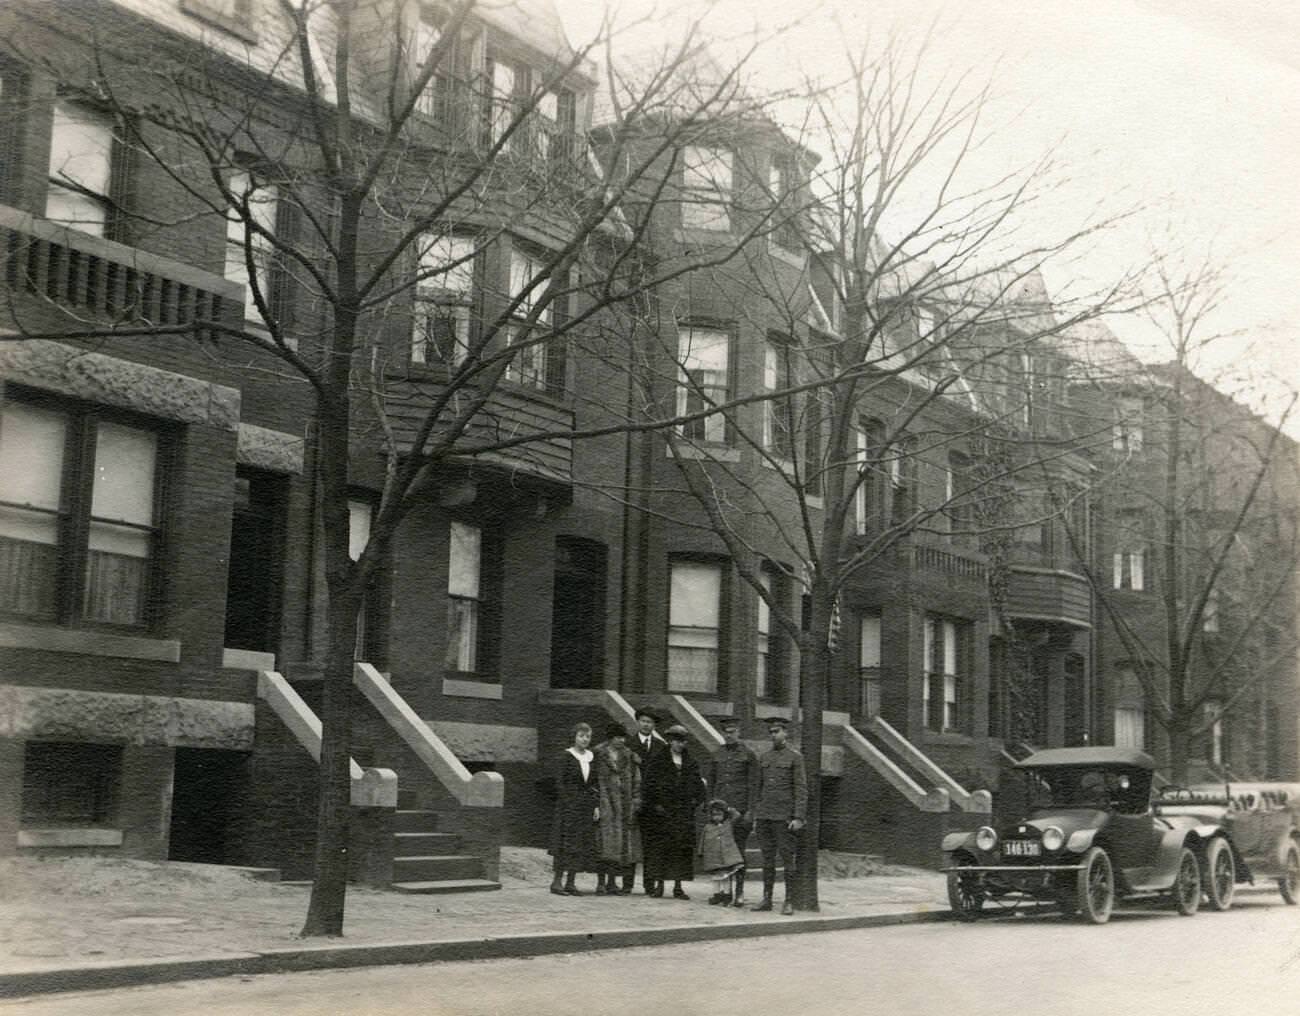 Family With 1918 Buick Parked In Front Of Townhouses, Possibly Brooklyn, 1918